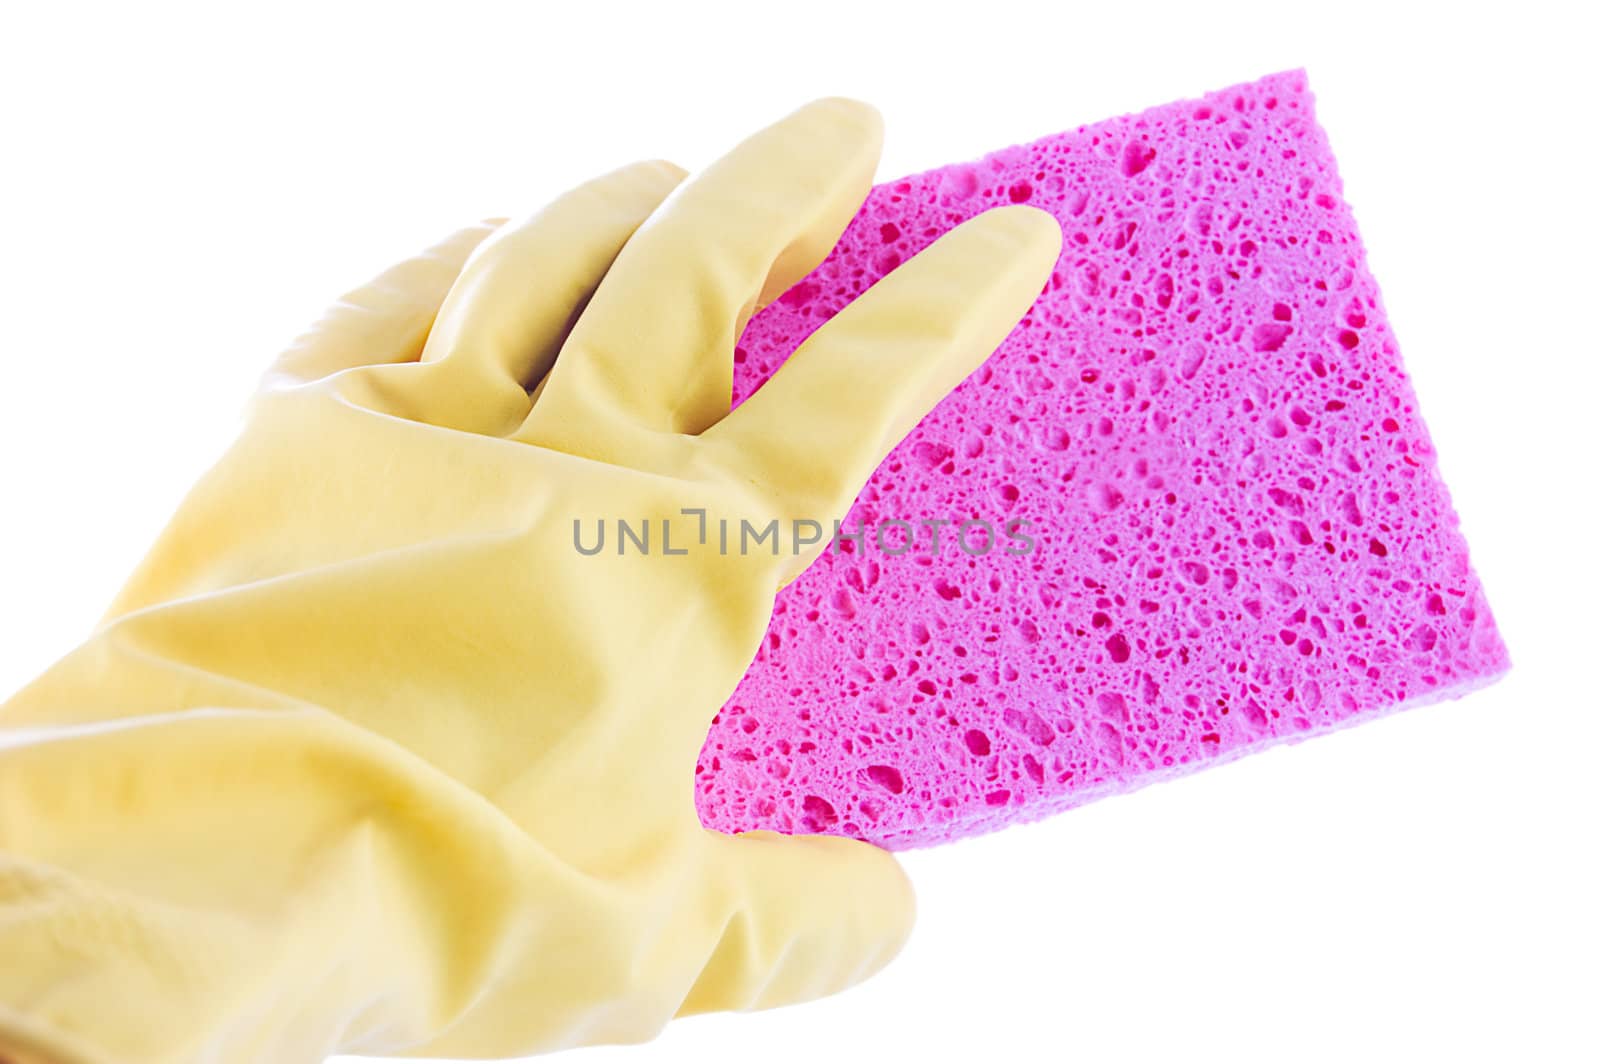 Hand in rubber glove cleaning with sponge over white